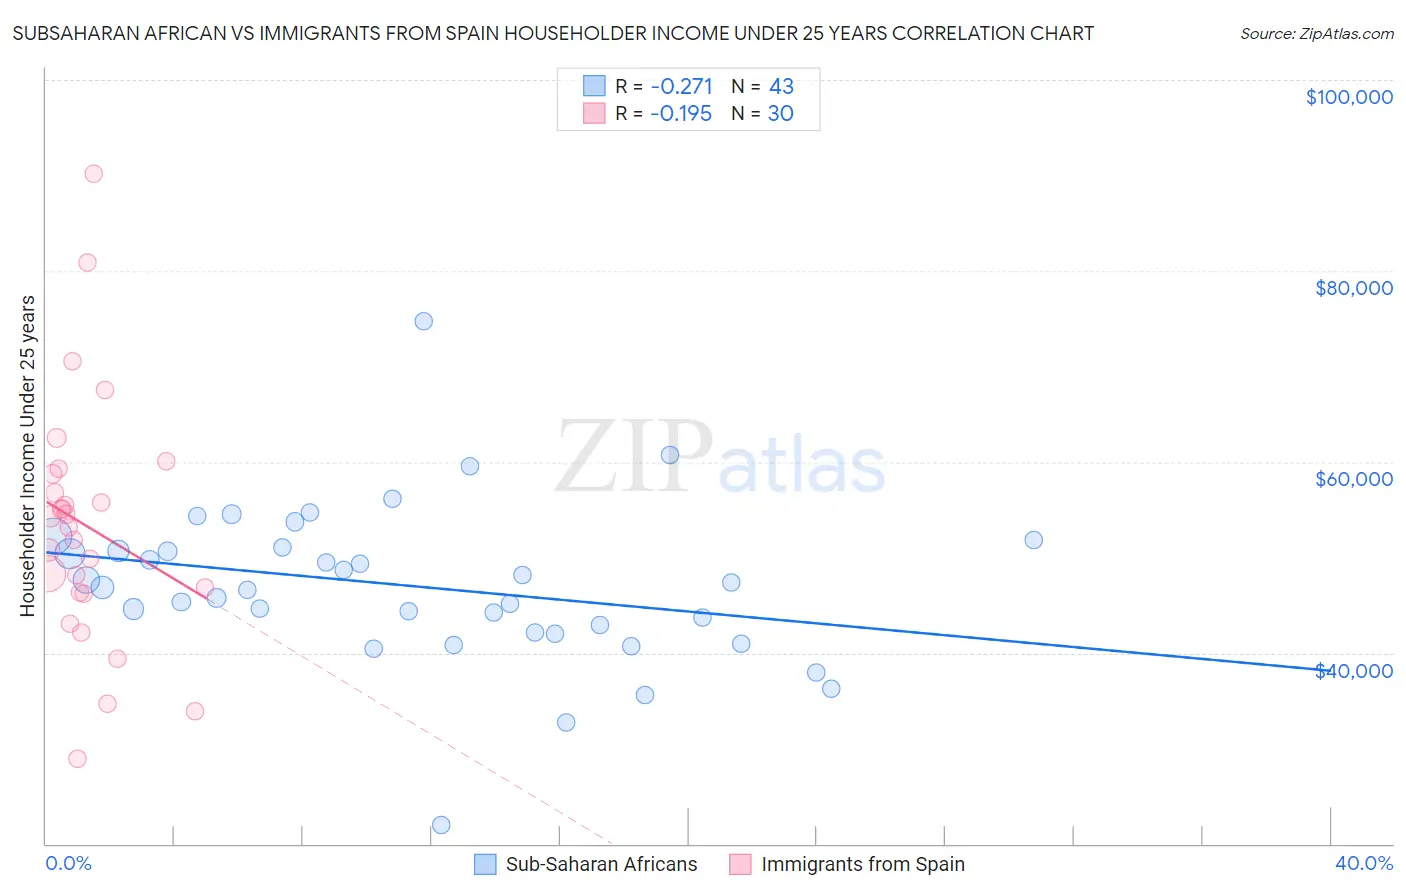 Subsaharan African vs Immigrants from Spain Householder Income Under 25 years